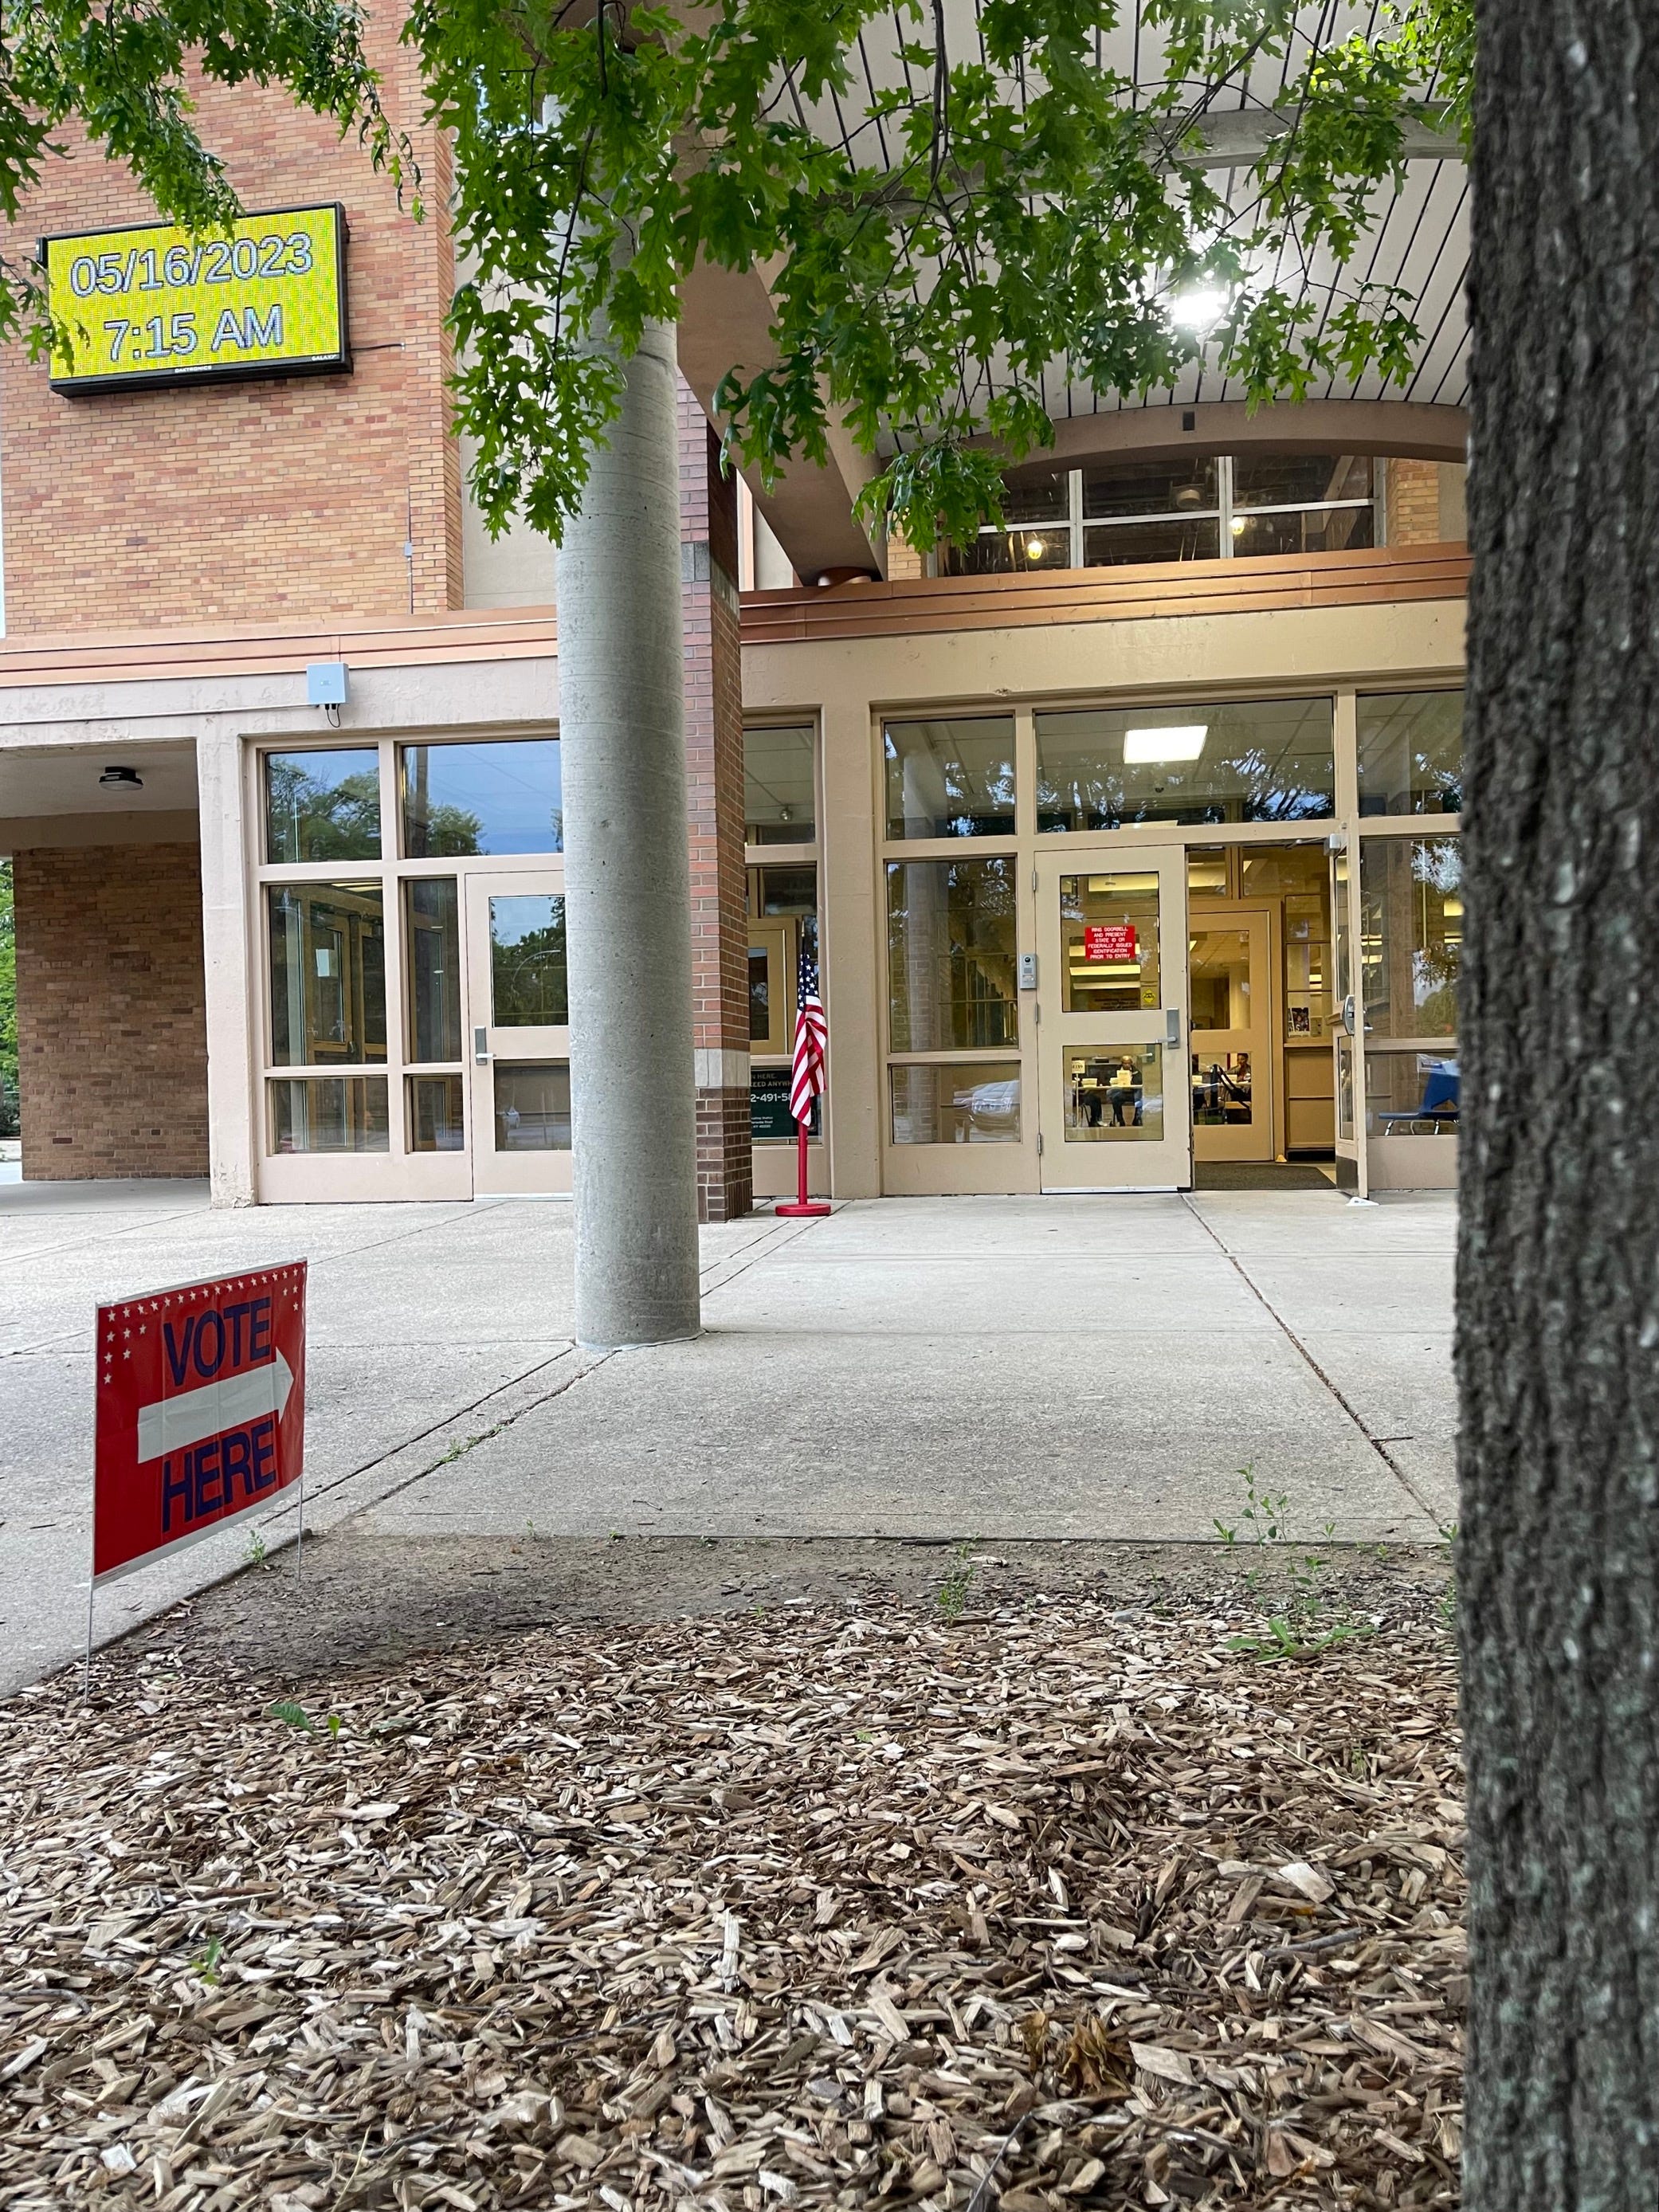 The Kentucky Primary 2023 polls opened at 6 a.m. Tuesday, May 16. At Central High School in Louisville no line was formed at around 7:15 a.m. and voters were able to walk directly in.